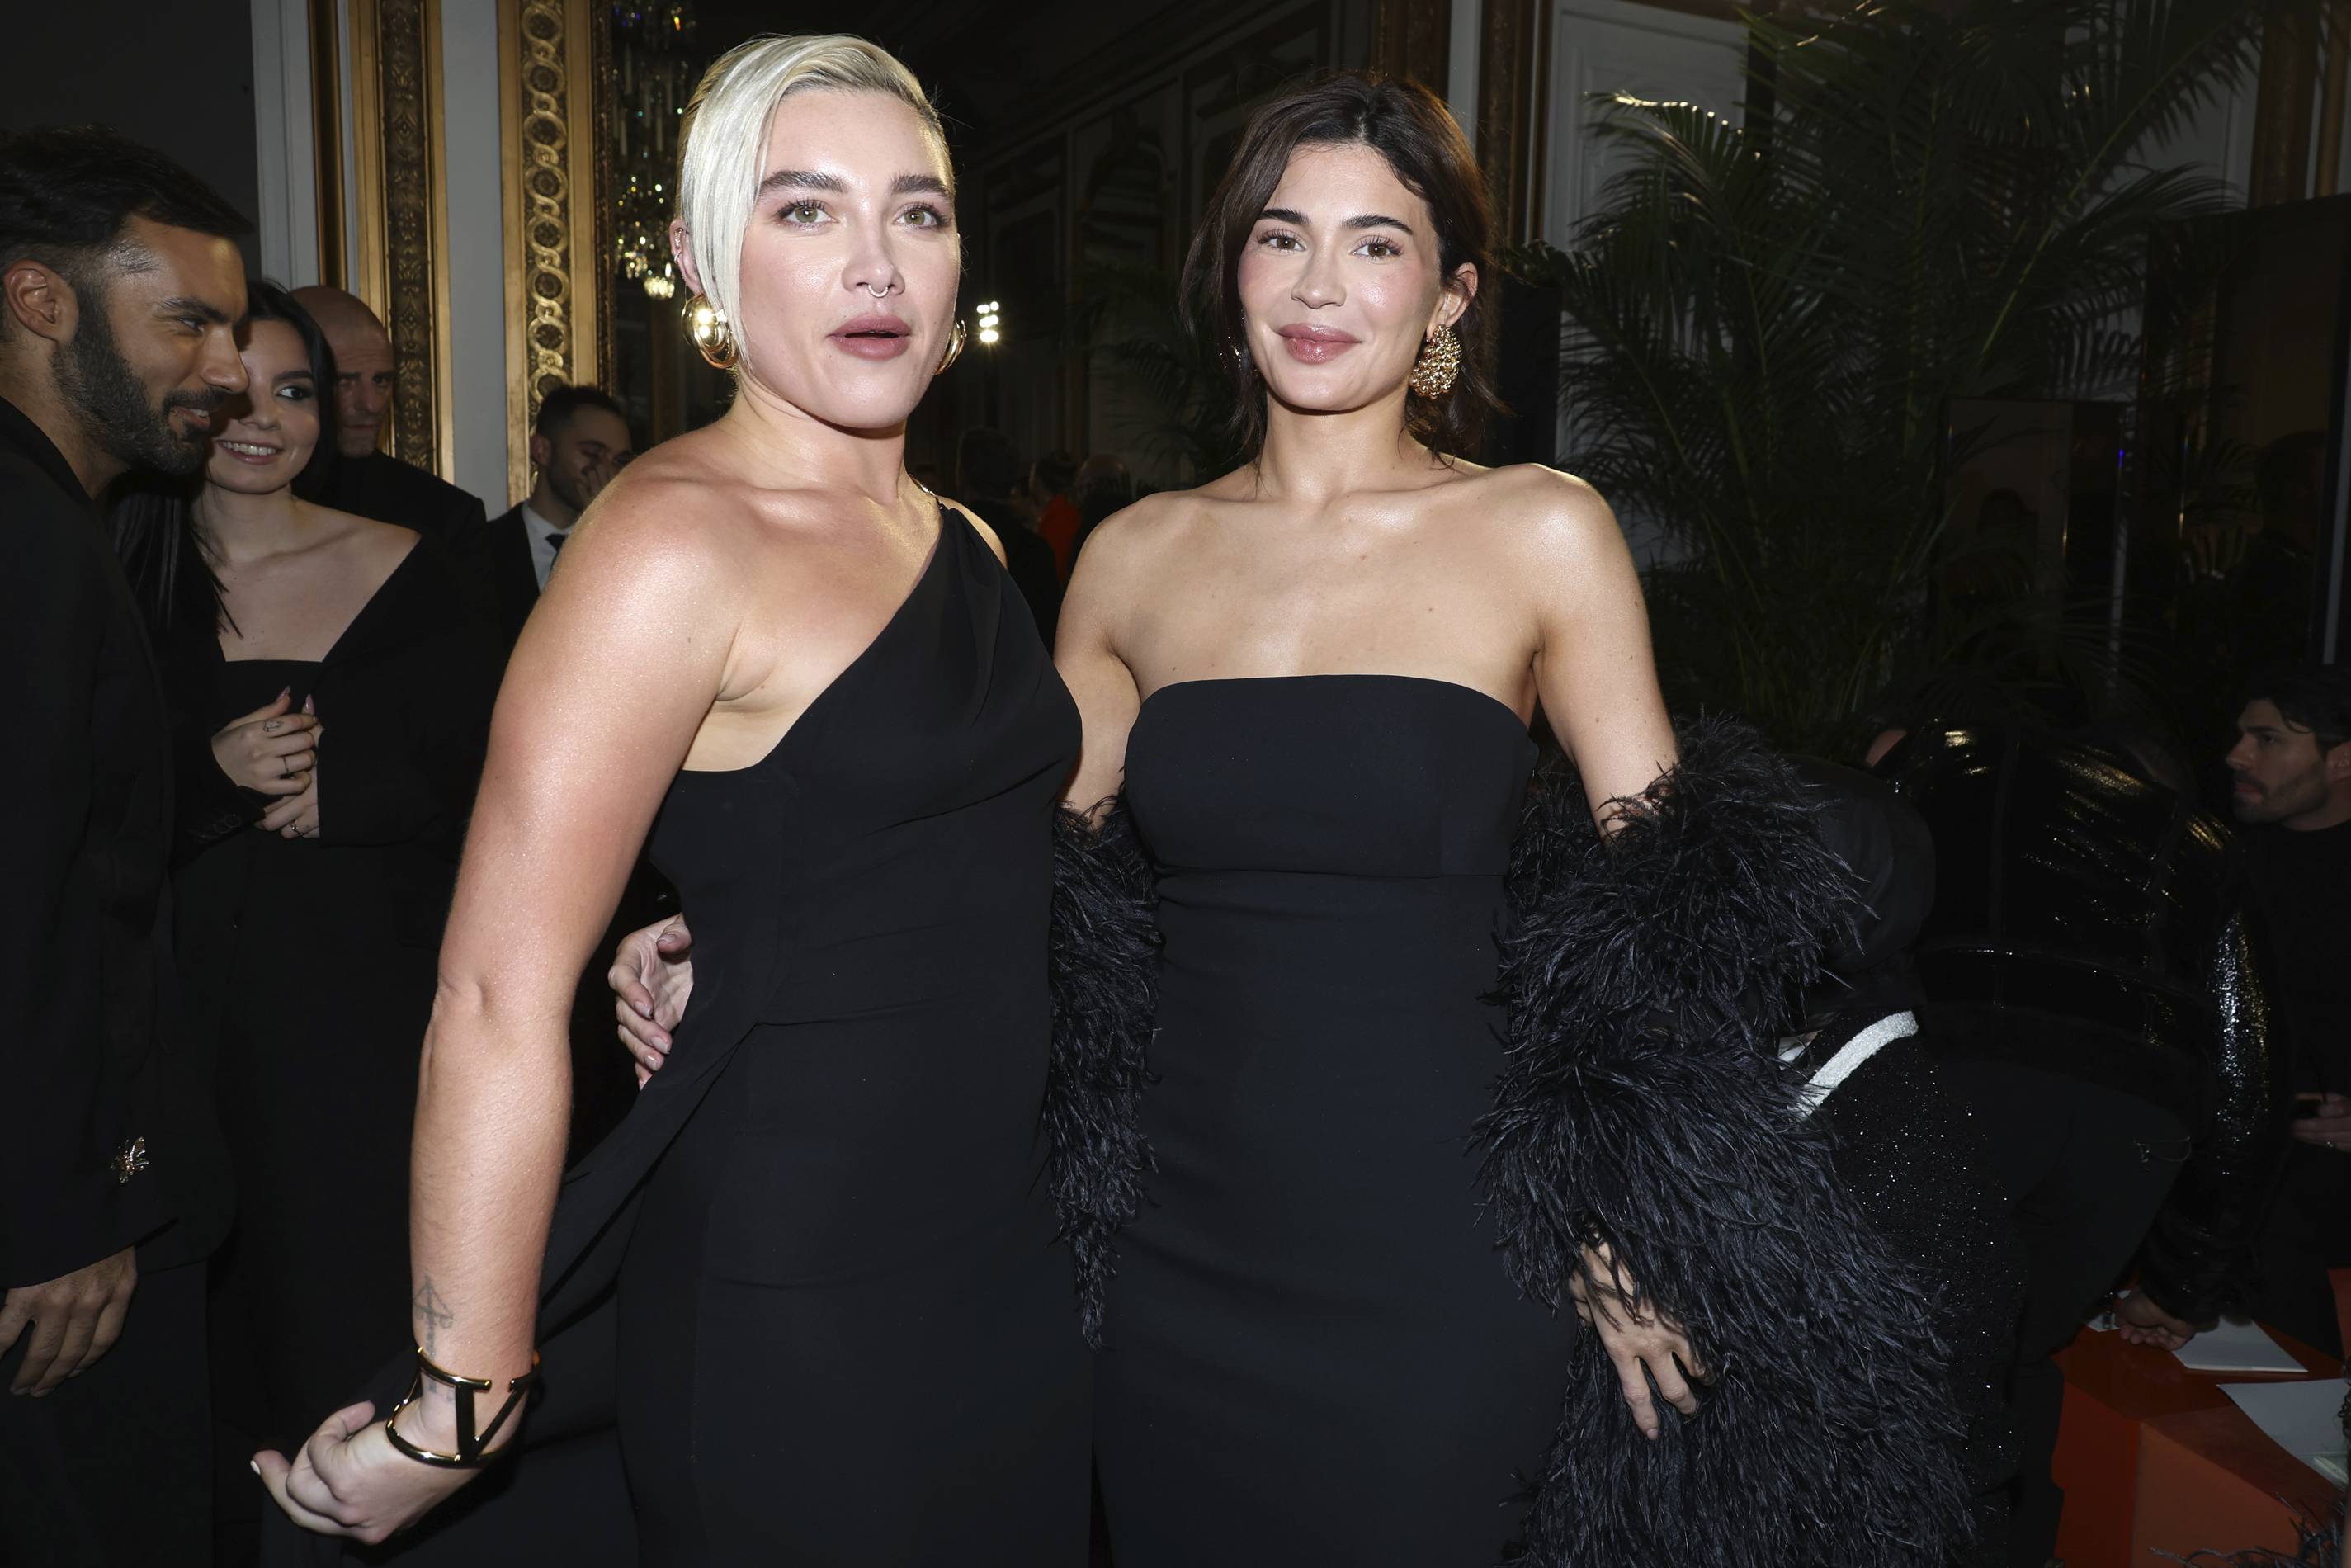 Florence Pugh and Kylie Jenner